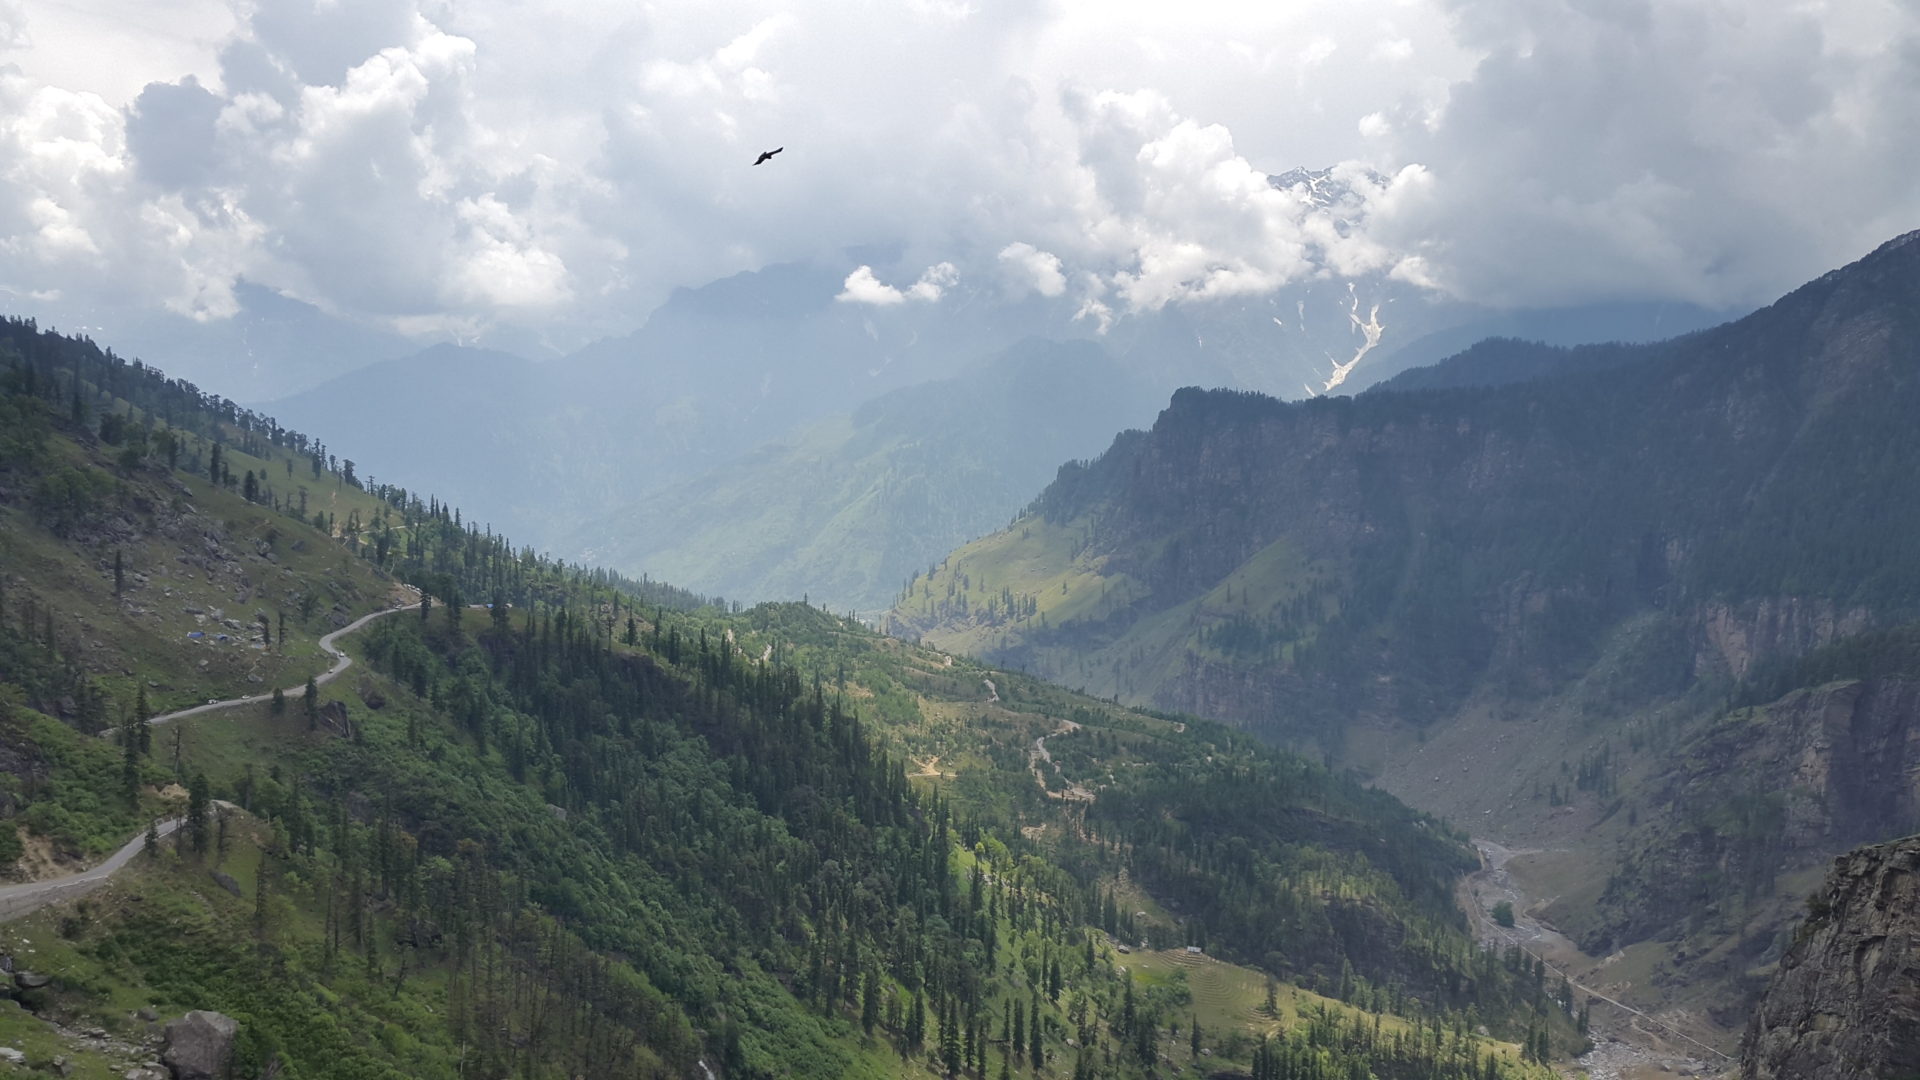 From Leh to Manali: The Perils and Joys of a Himalayan Adventure in India